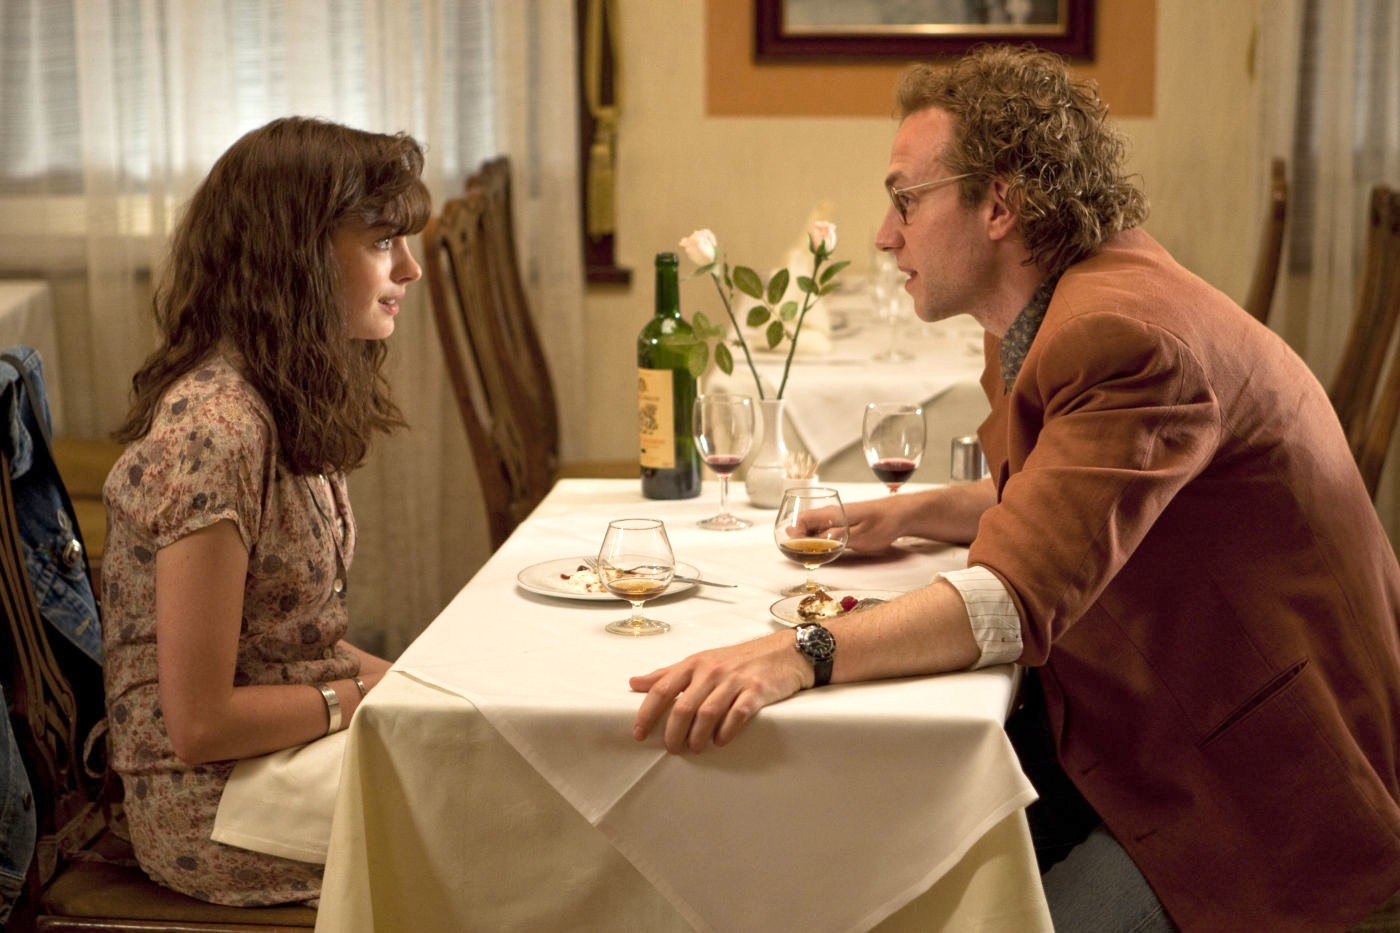 Anne Hathaway stars as Emma Morley and Rafe Spall stars as Ian Whitehead in Focus Features' One Day (2011)